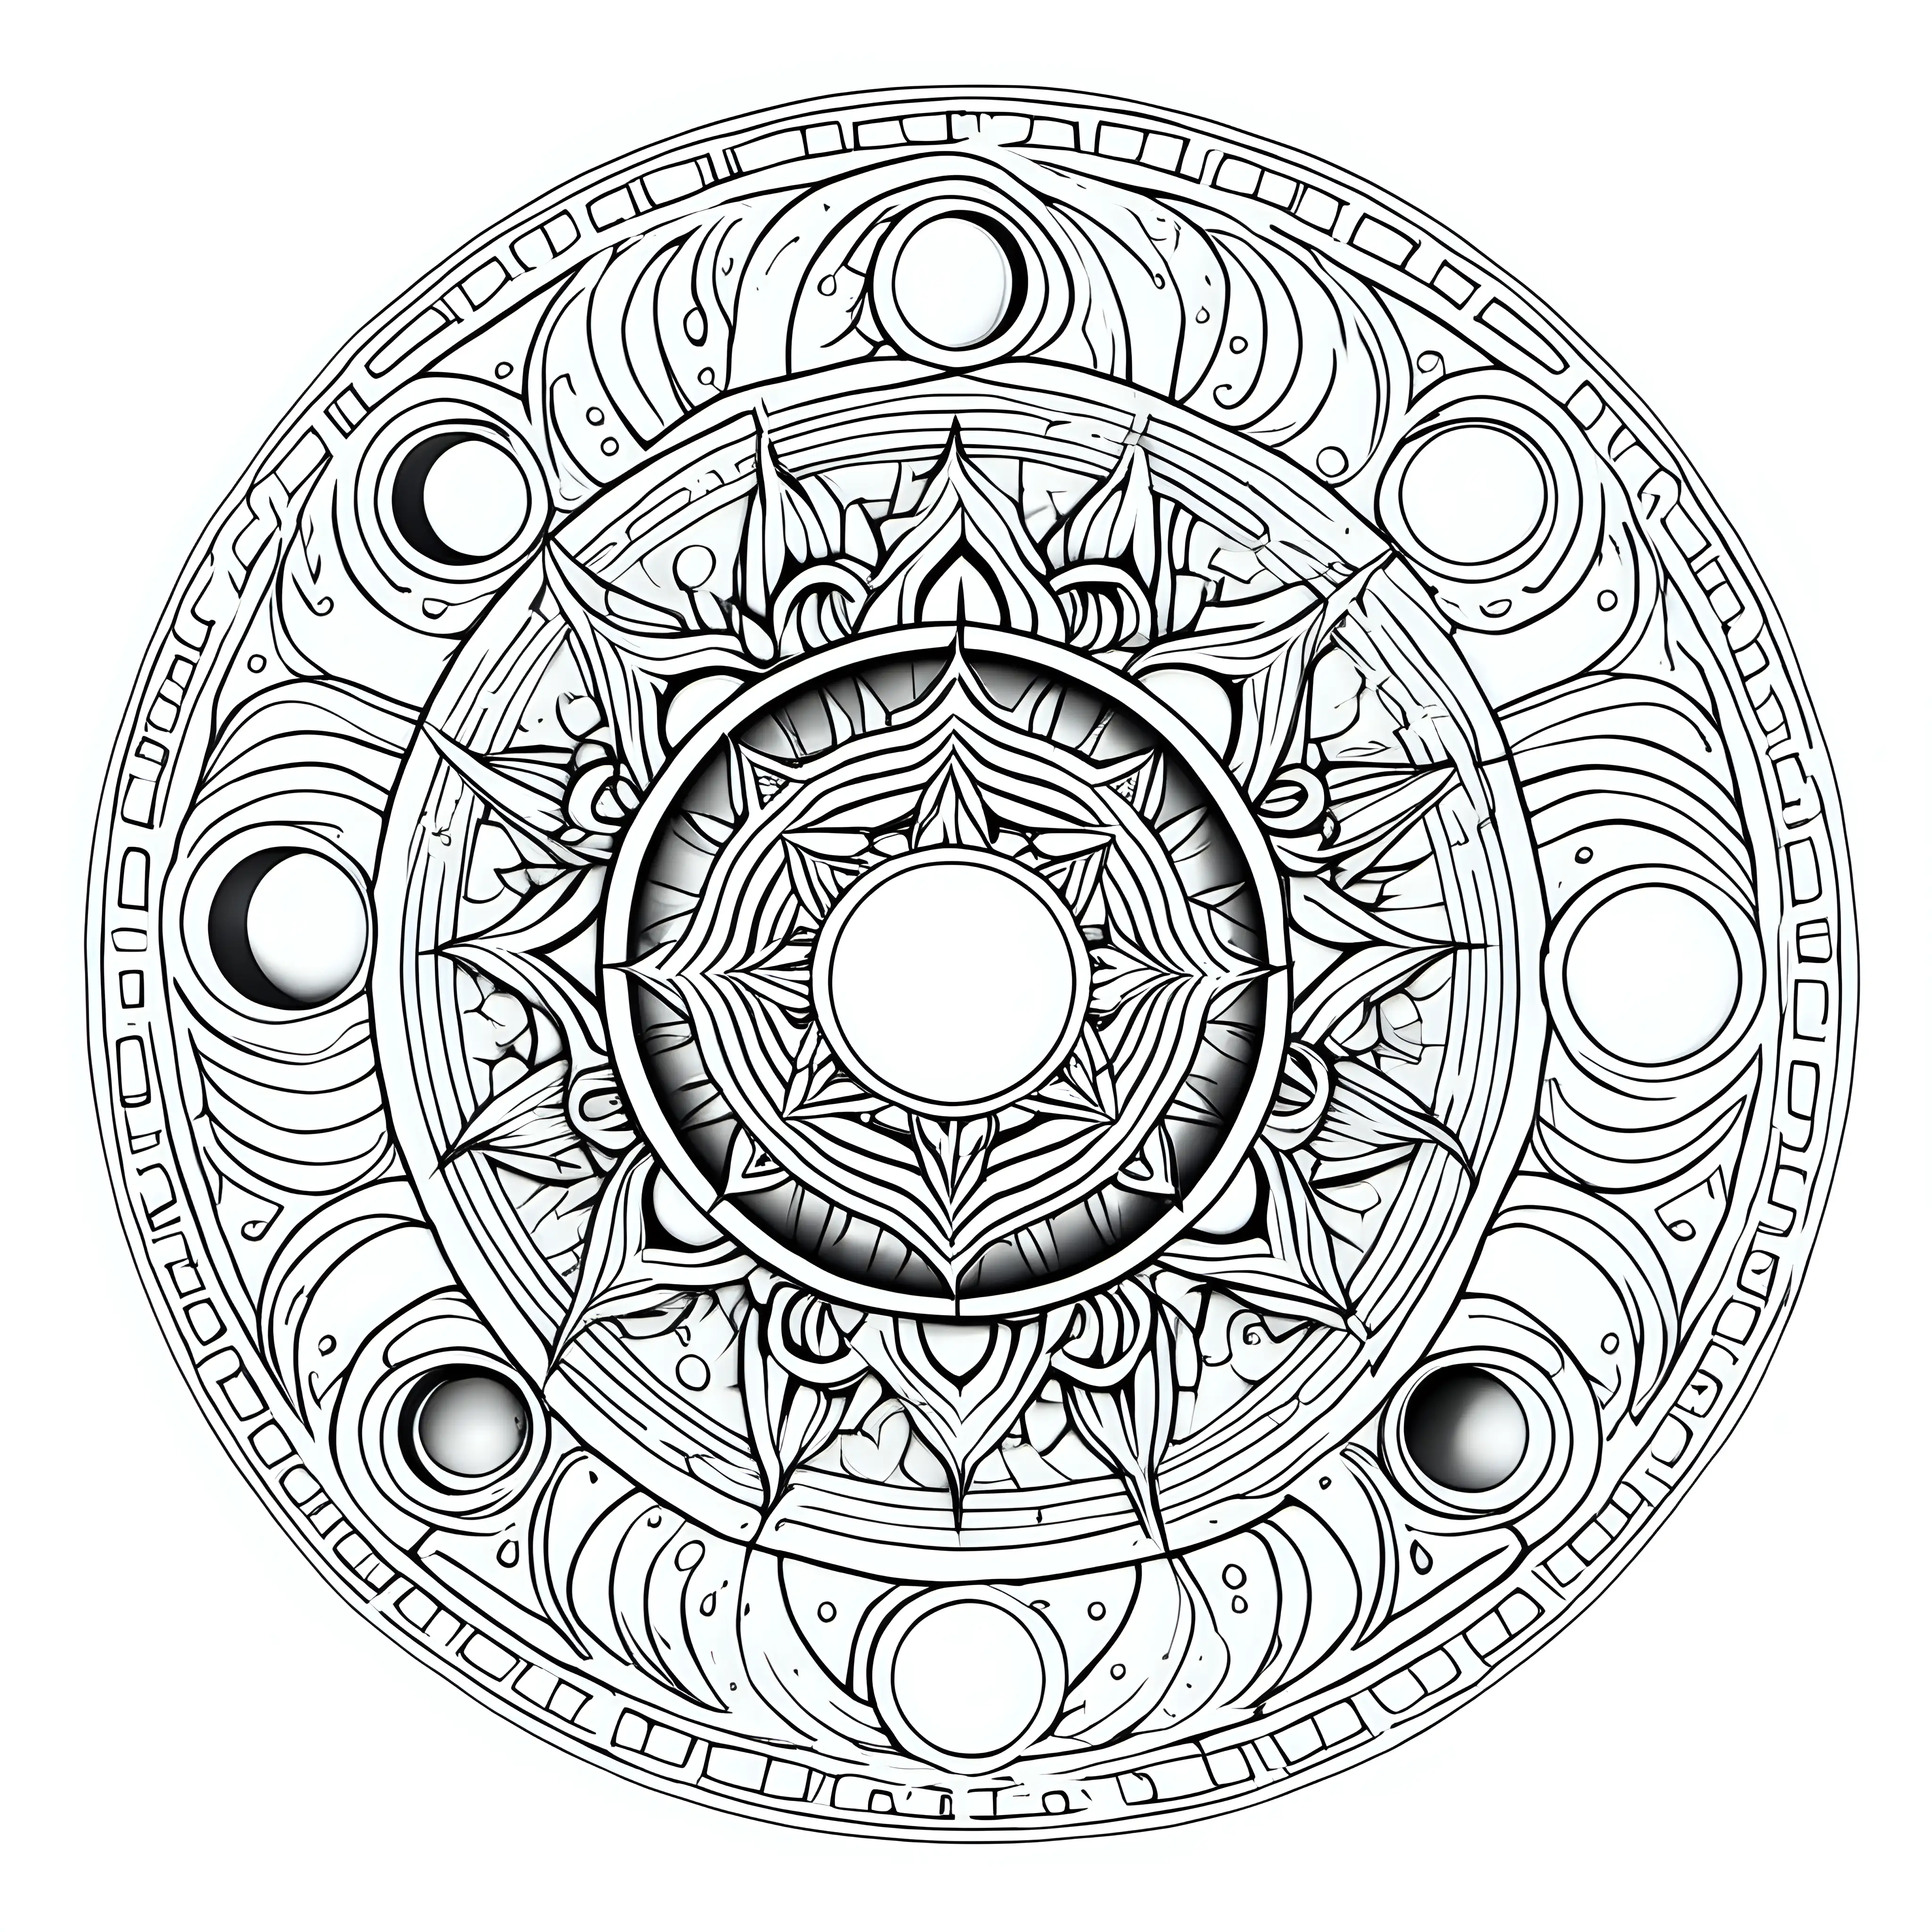 Lunar Mandala: A mandala inspired by the phases of the moon, with crescents and full moon patterns. for coloring book with crisp lines and white background